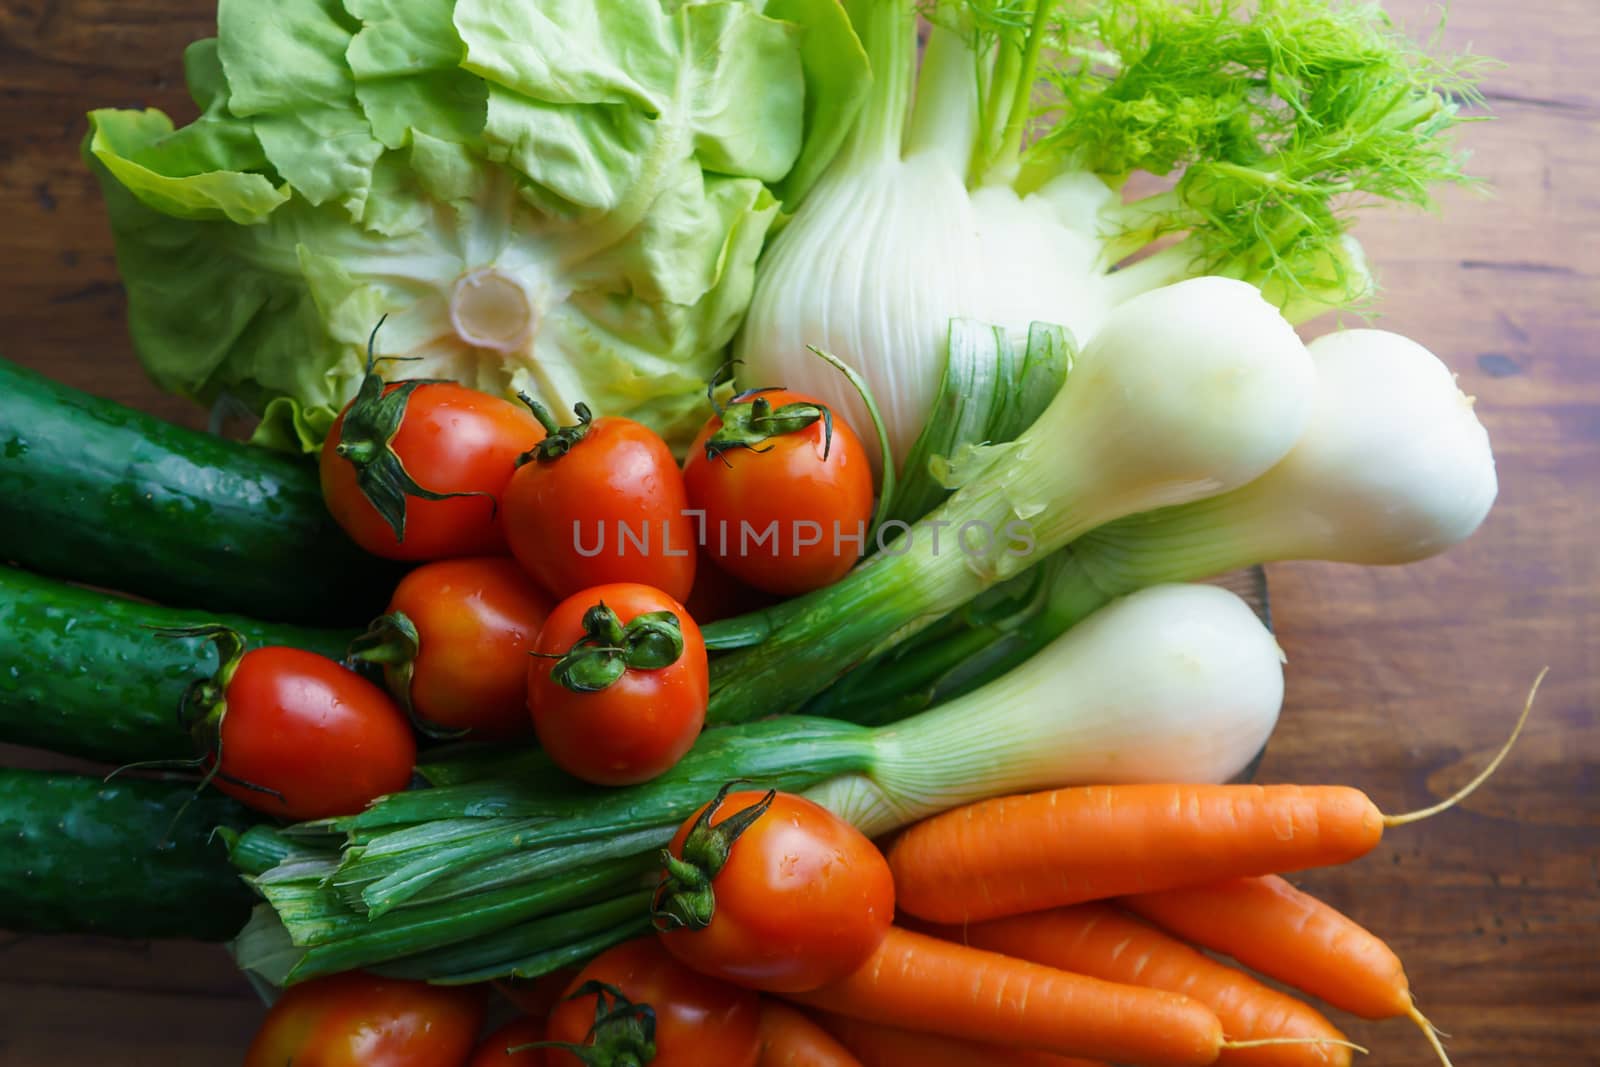 Healthy nutrition with fresh raw vegetables: flat lay top view of a group of salad ingredients, lettuce, tomatoes, cucumbers, fennel, spring onions, and carrots on a wooden table copy space